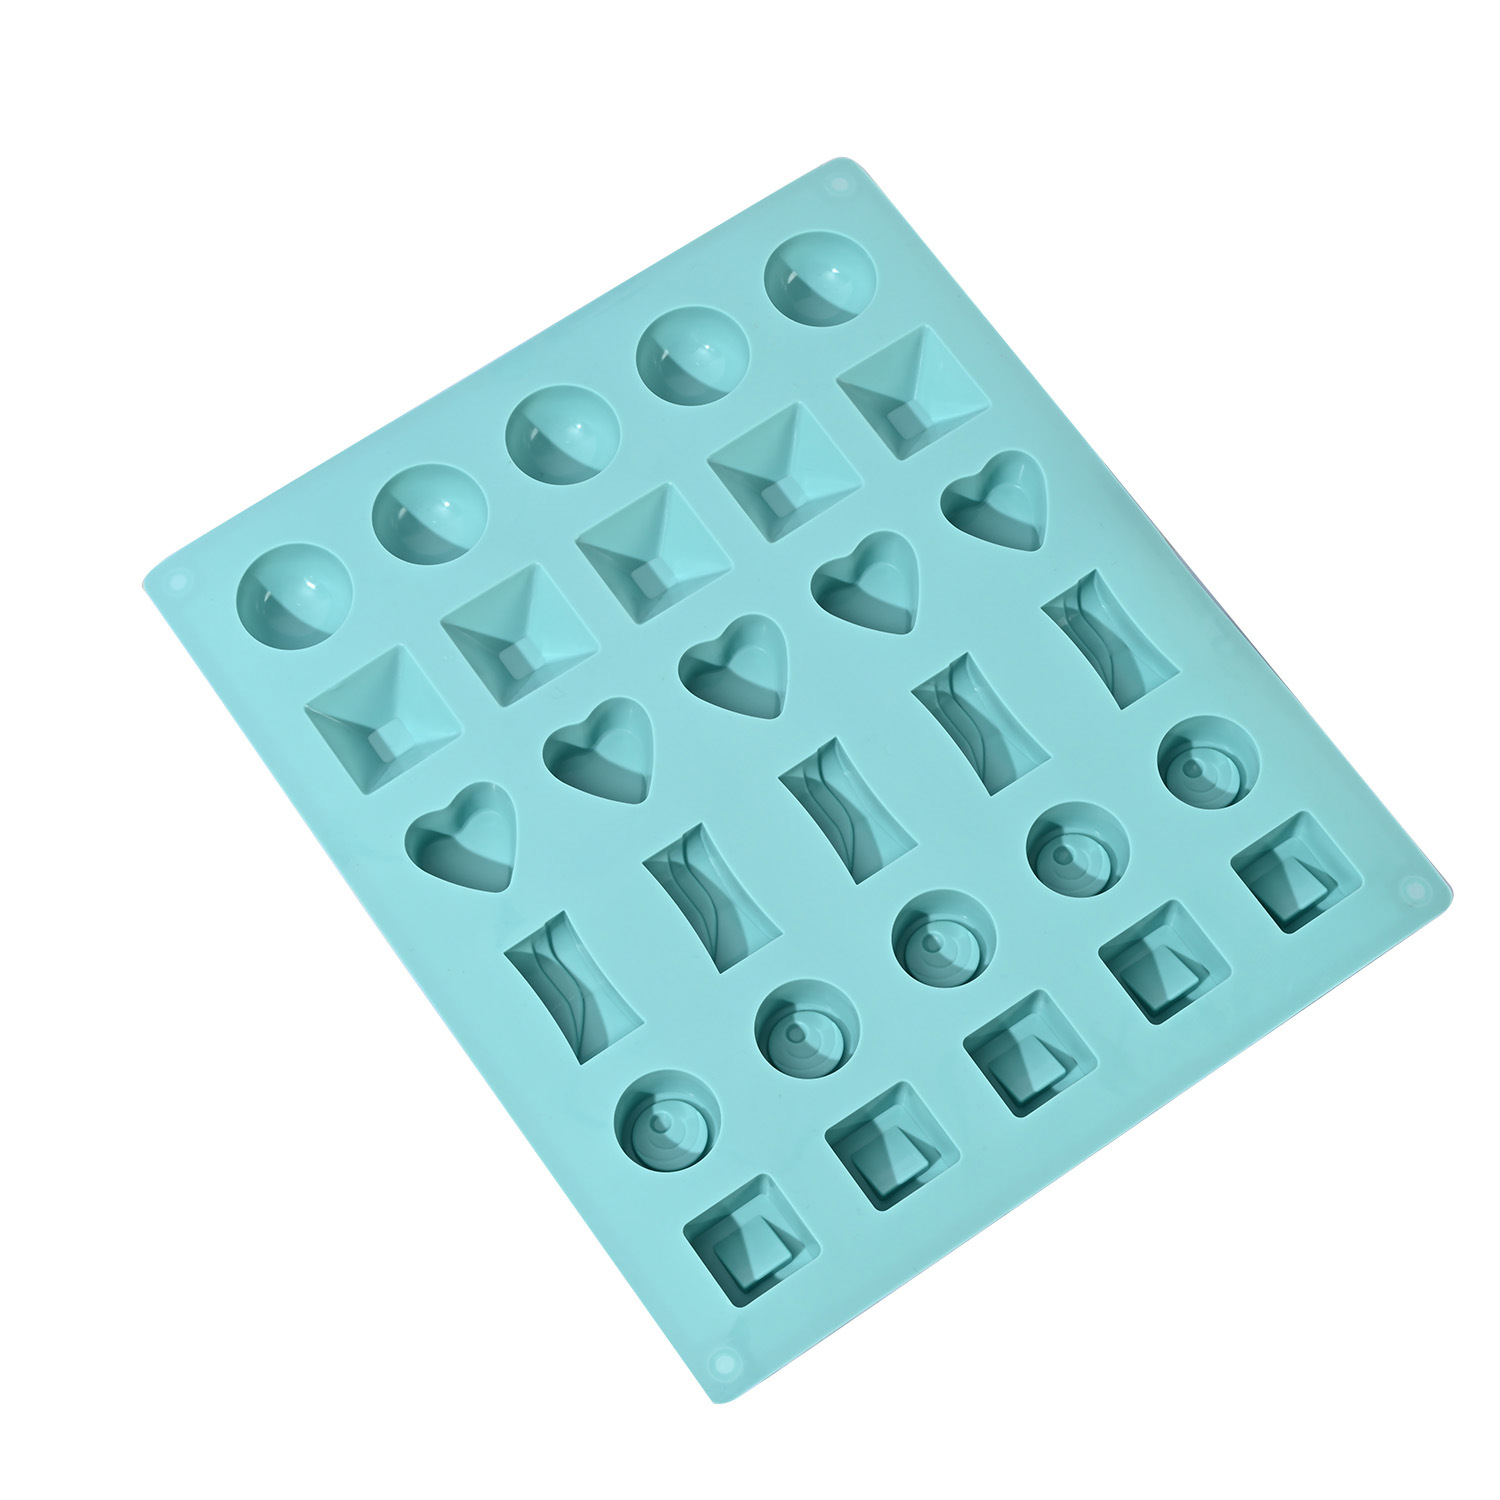 Diy Edible Silicon Chocolate Silicone Mold 30 Grid Square Love Household Handmade Cake Mold Ice Tray